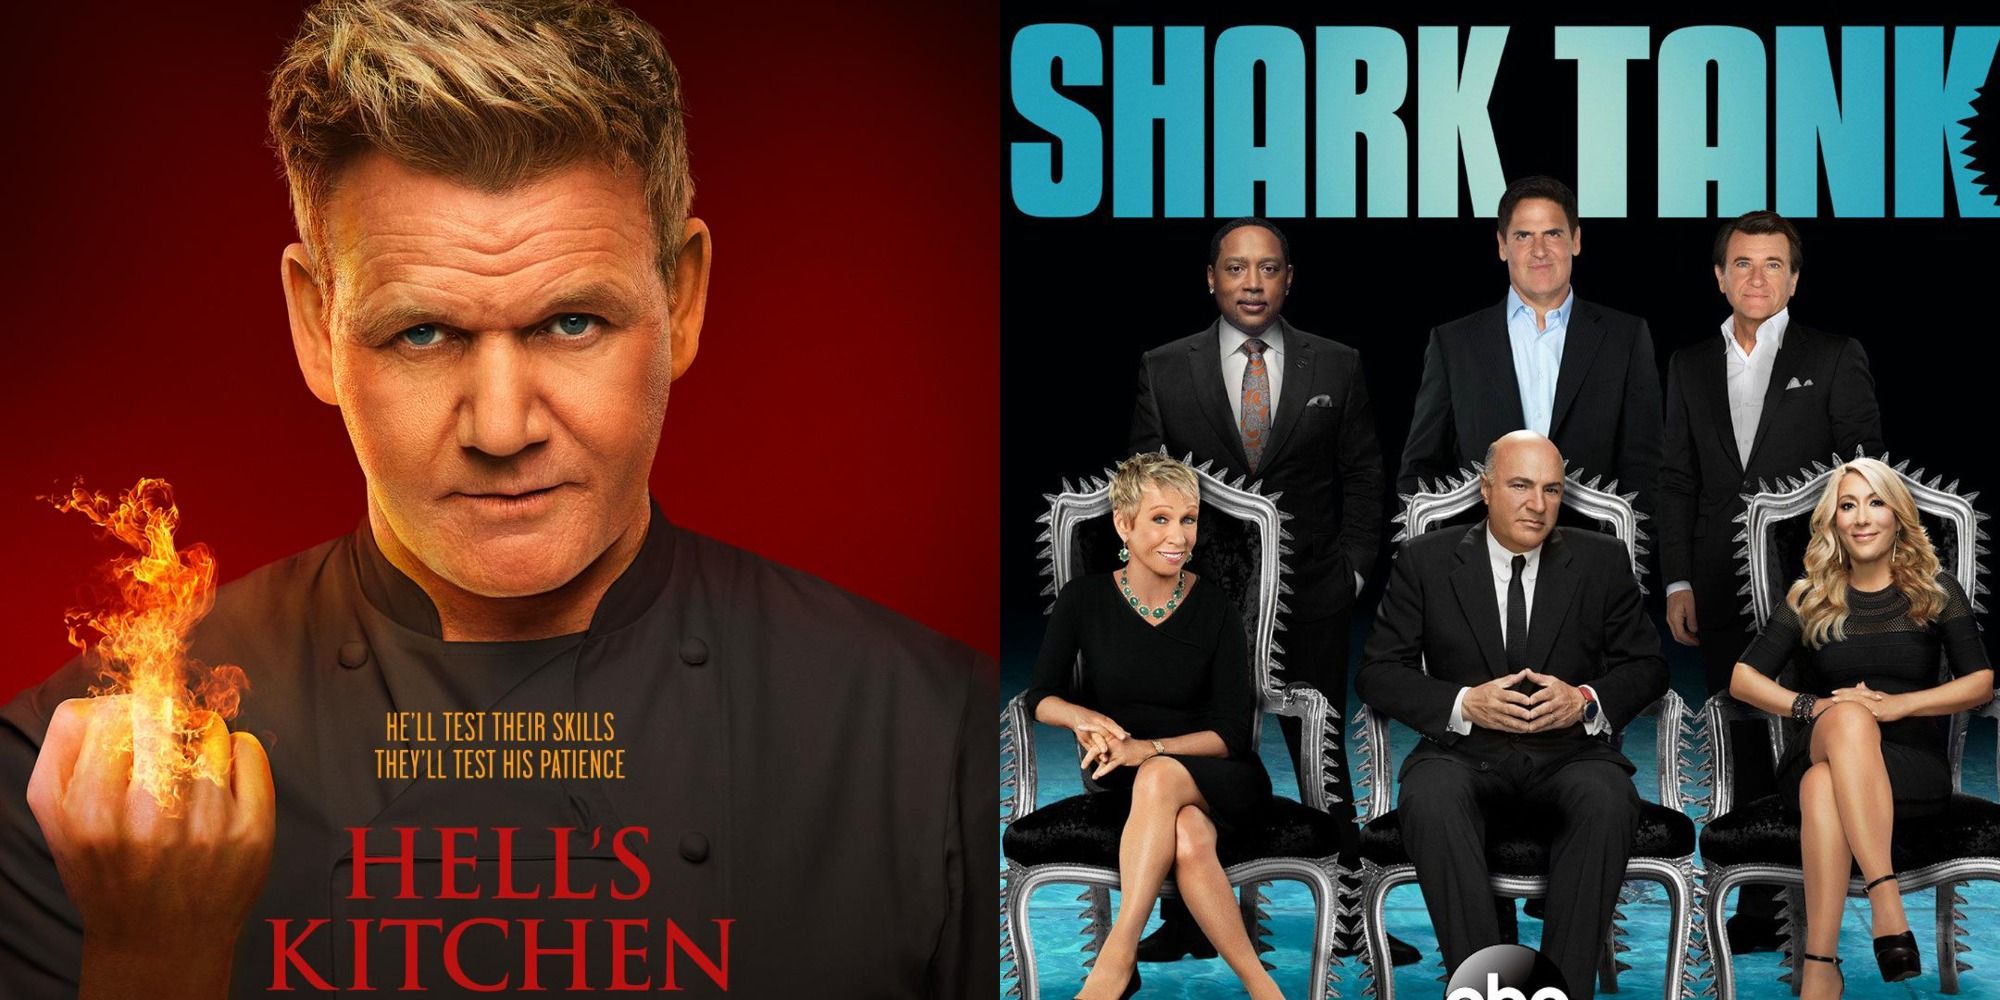 Split image showing posters for Hell's Kitchen and Shark Tank